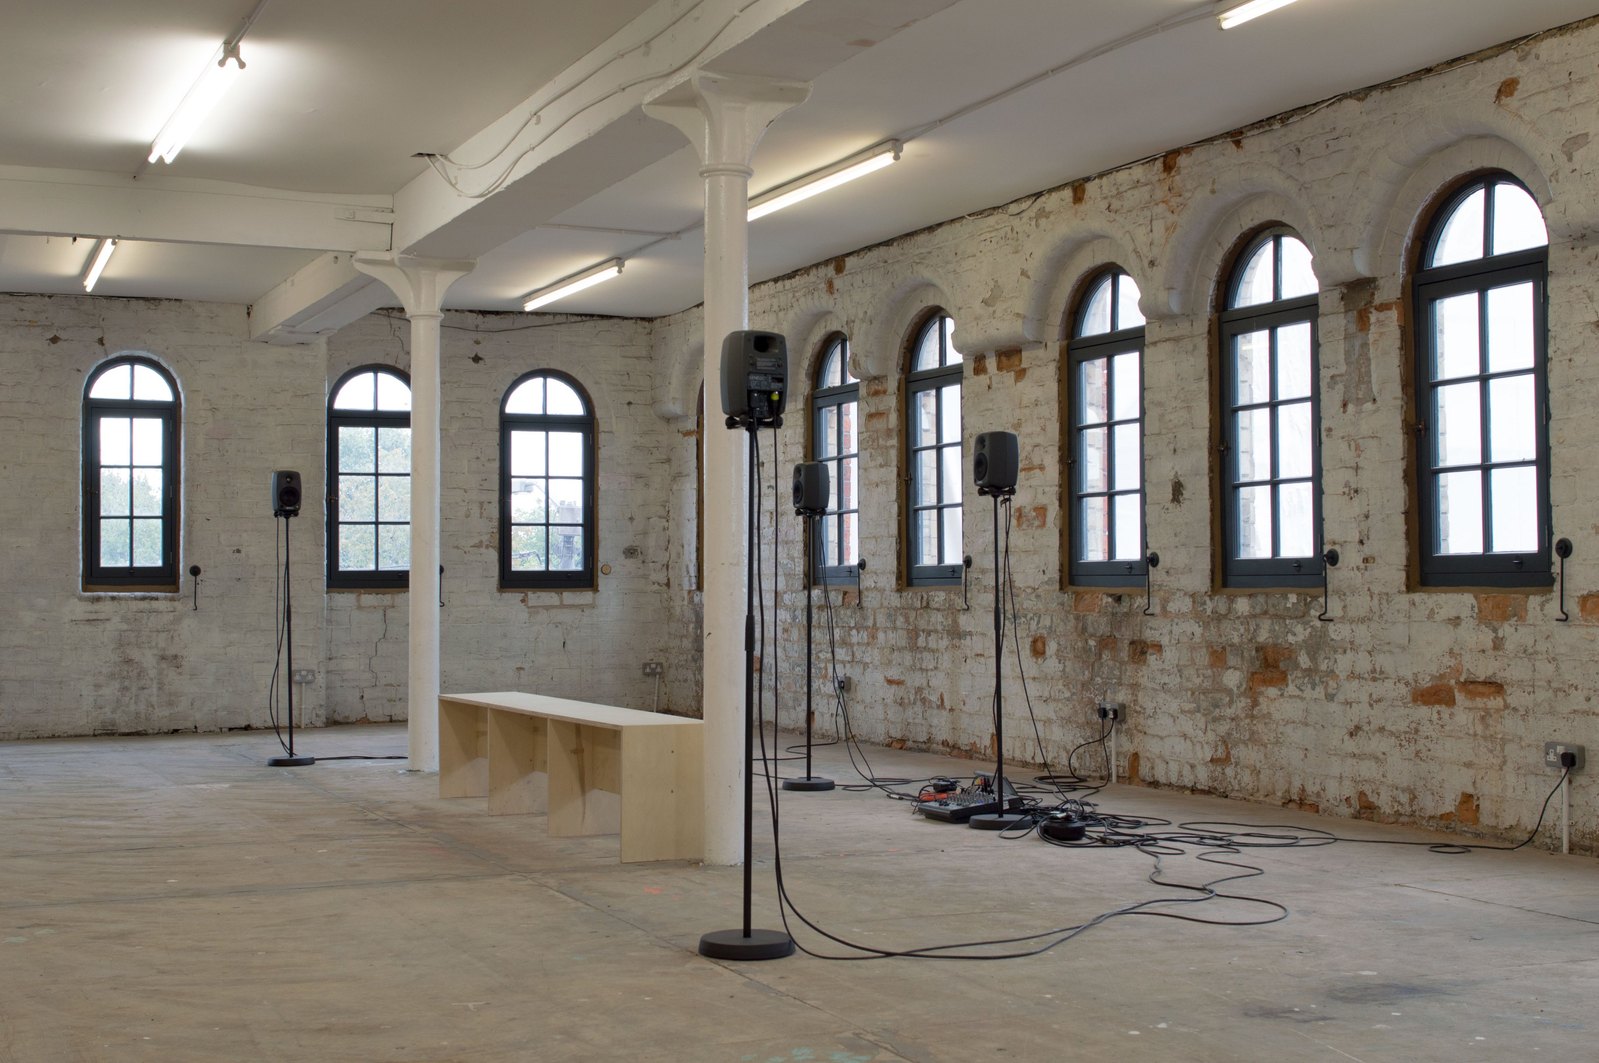 An old factory building with arches windows, white pillars and plywood floor. There is a wooden bench and an audio system. Jamie Kane